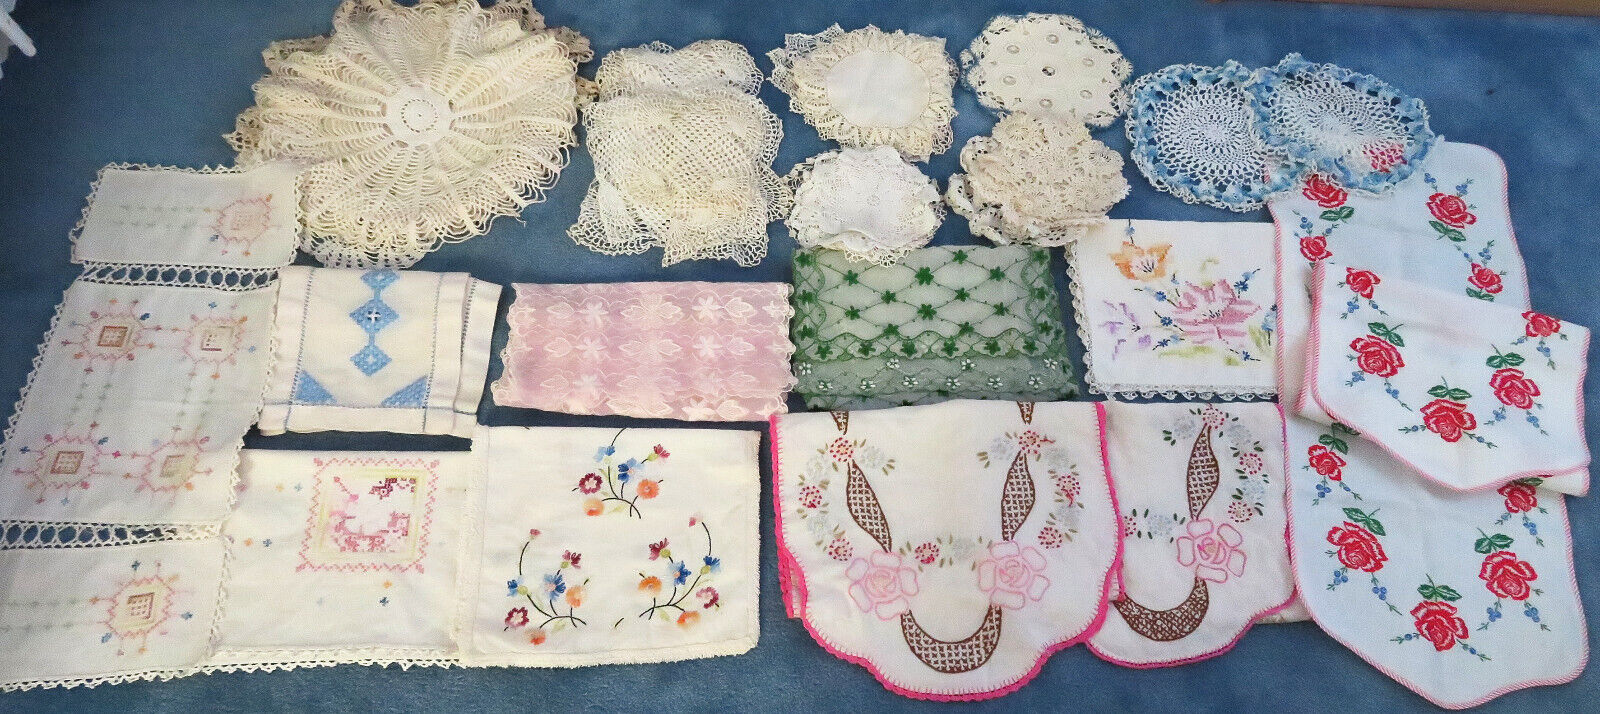 vintage Lot 50 hand-crochet DOILIES & 10 hand-embroidered RUNNERS fresh & clean